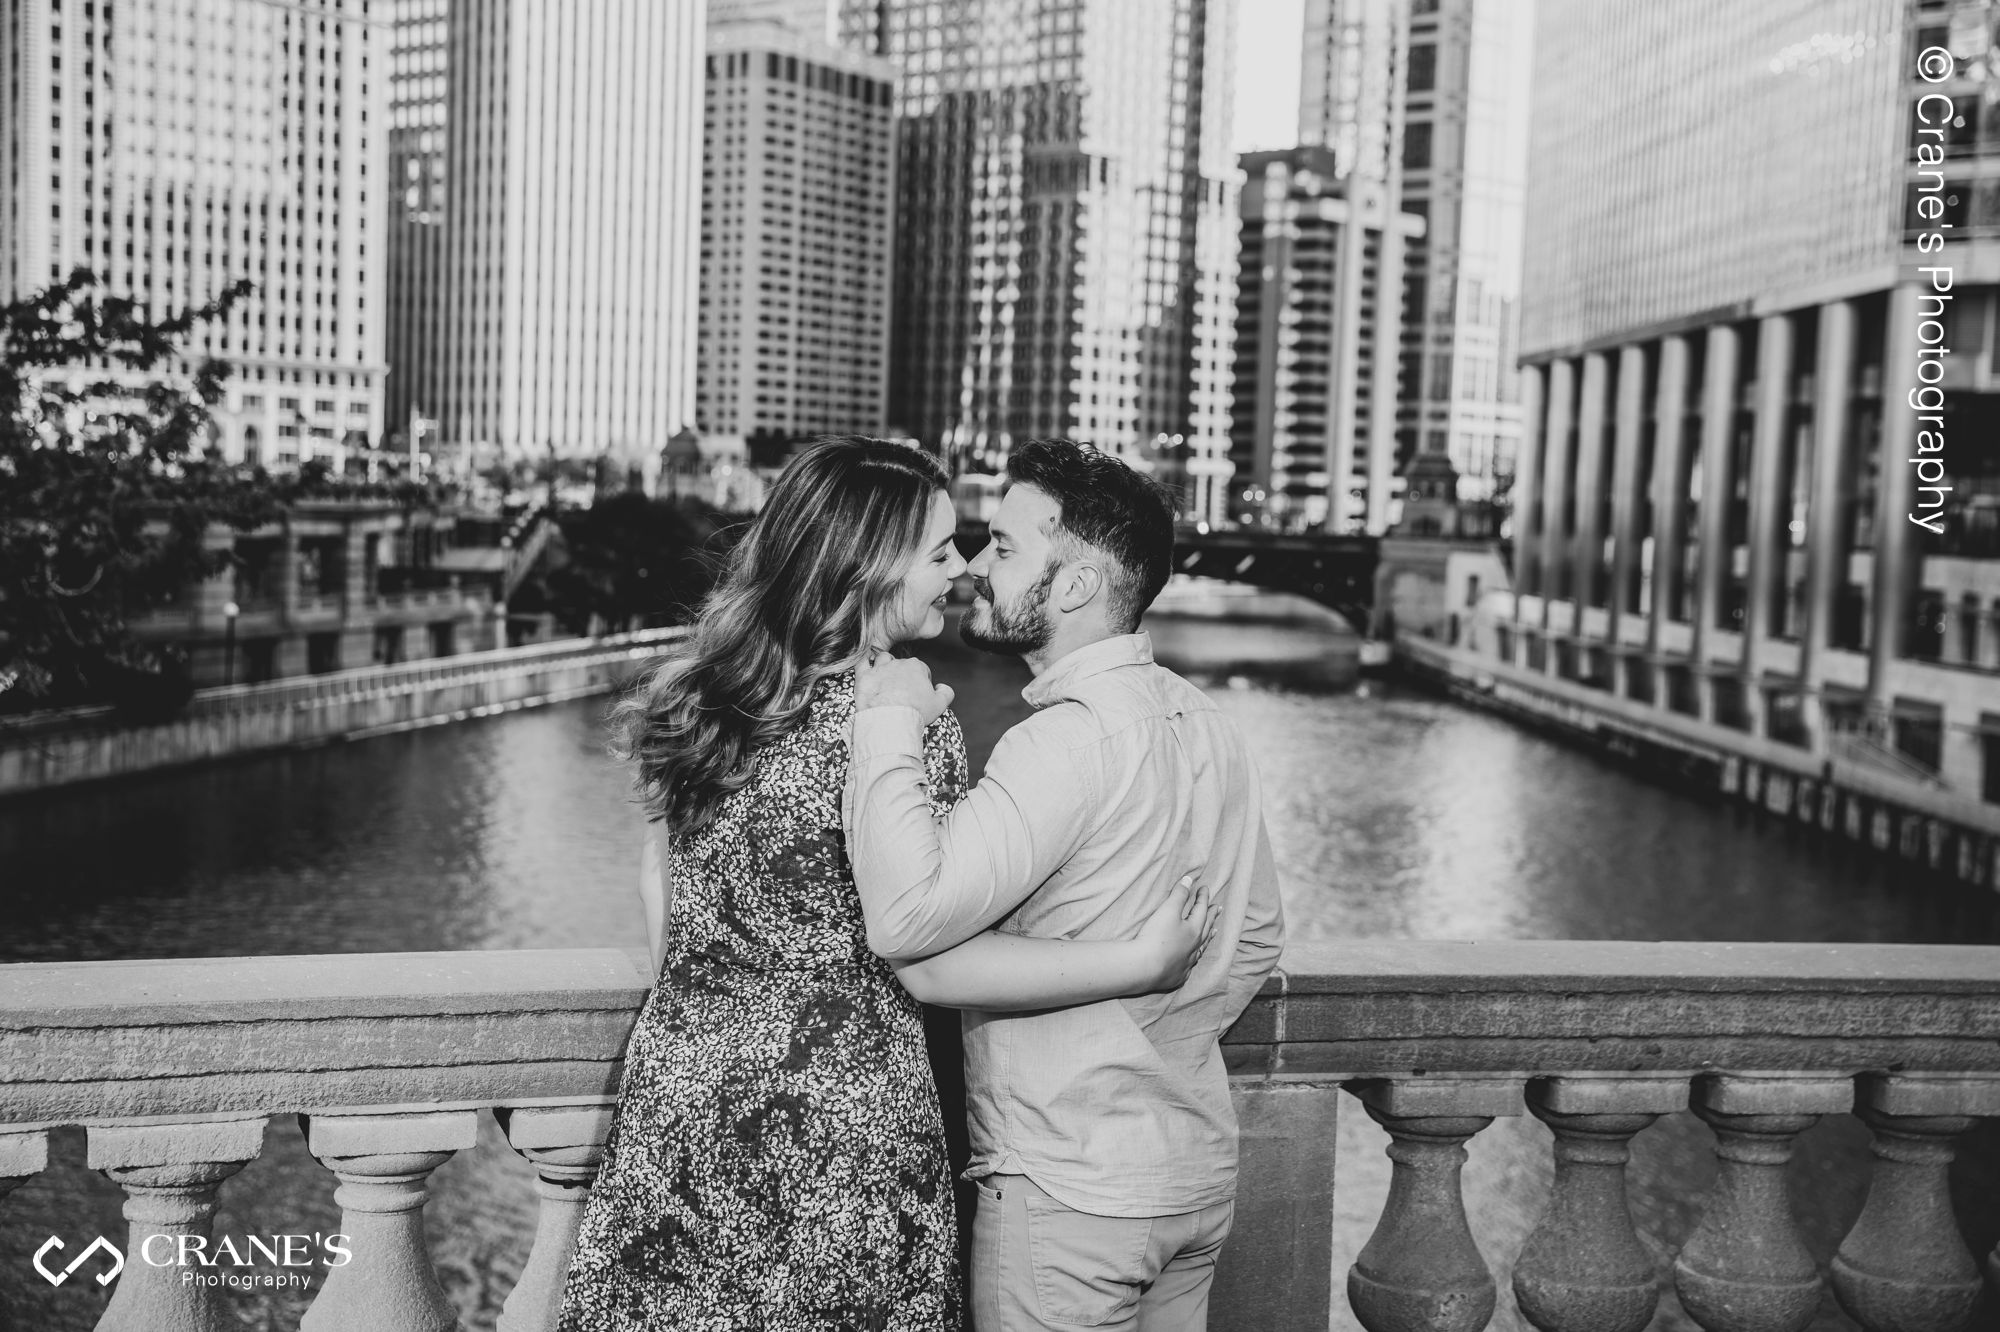 An engagement photo near The RiverWalk in Chicago